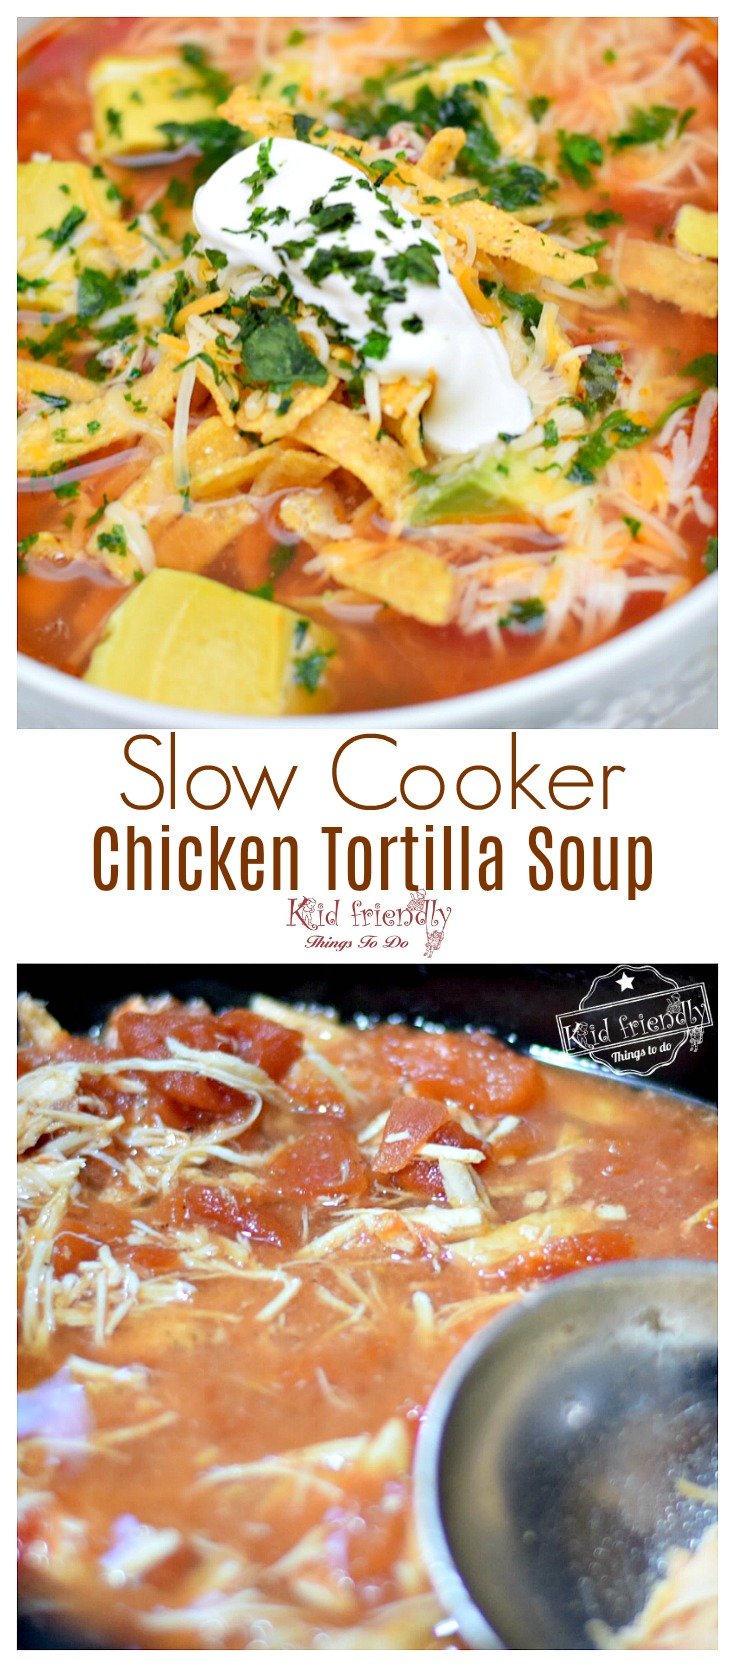 Easy and Healthy Slow Cooker Chicken Tortilla Soup Recipe - The most delicious tortilla soup, ever! The best! So easy too. www.kidfriendlythingstodo.com